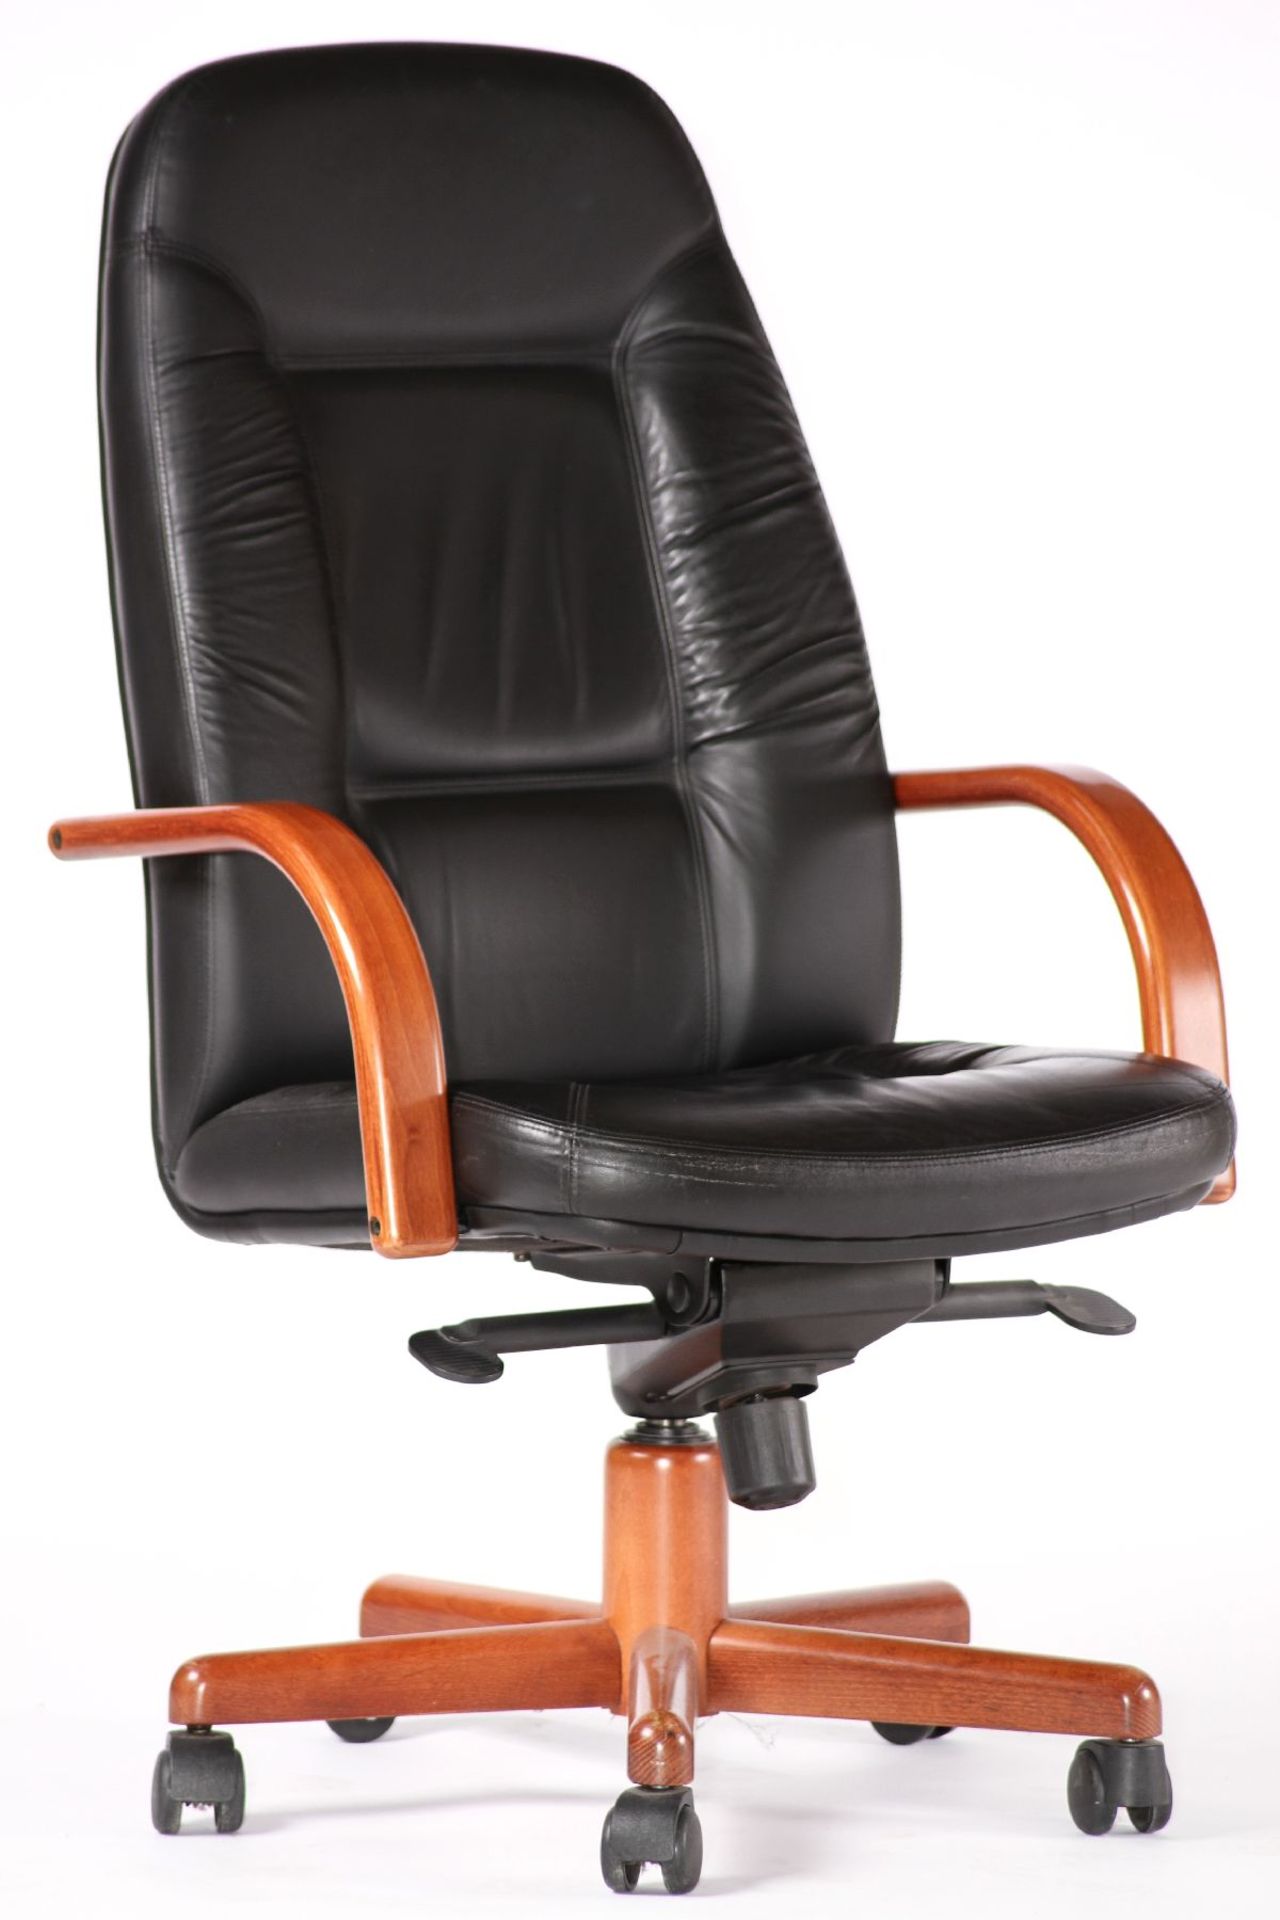 Office swivel chair, foot and armrests made ofsolid wood, stained on walnut, black leather covers,